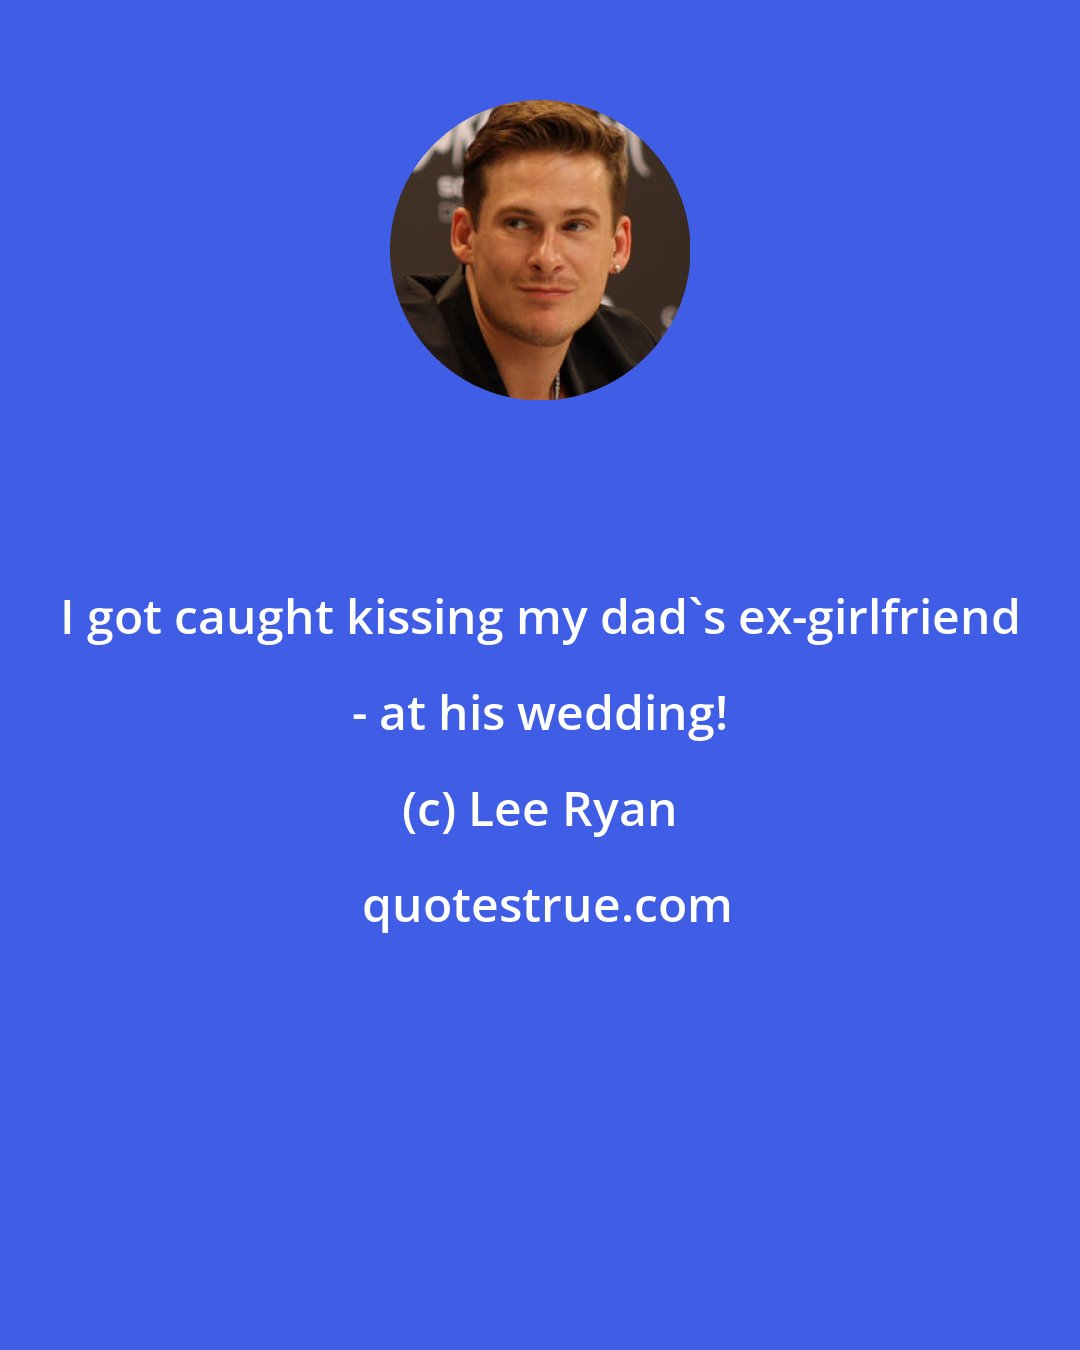 Lee Ryan: I got caught kissing my dad's ex-girlfriend - at his wedding!